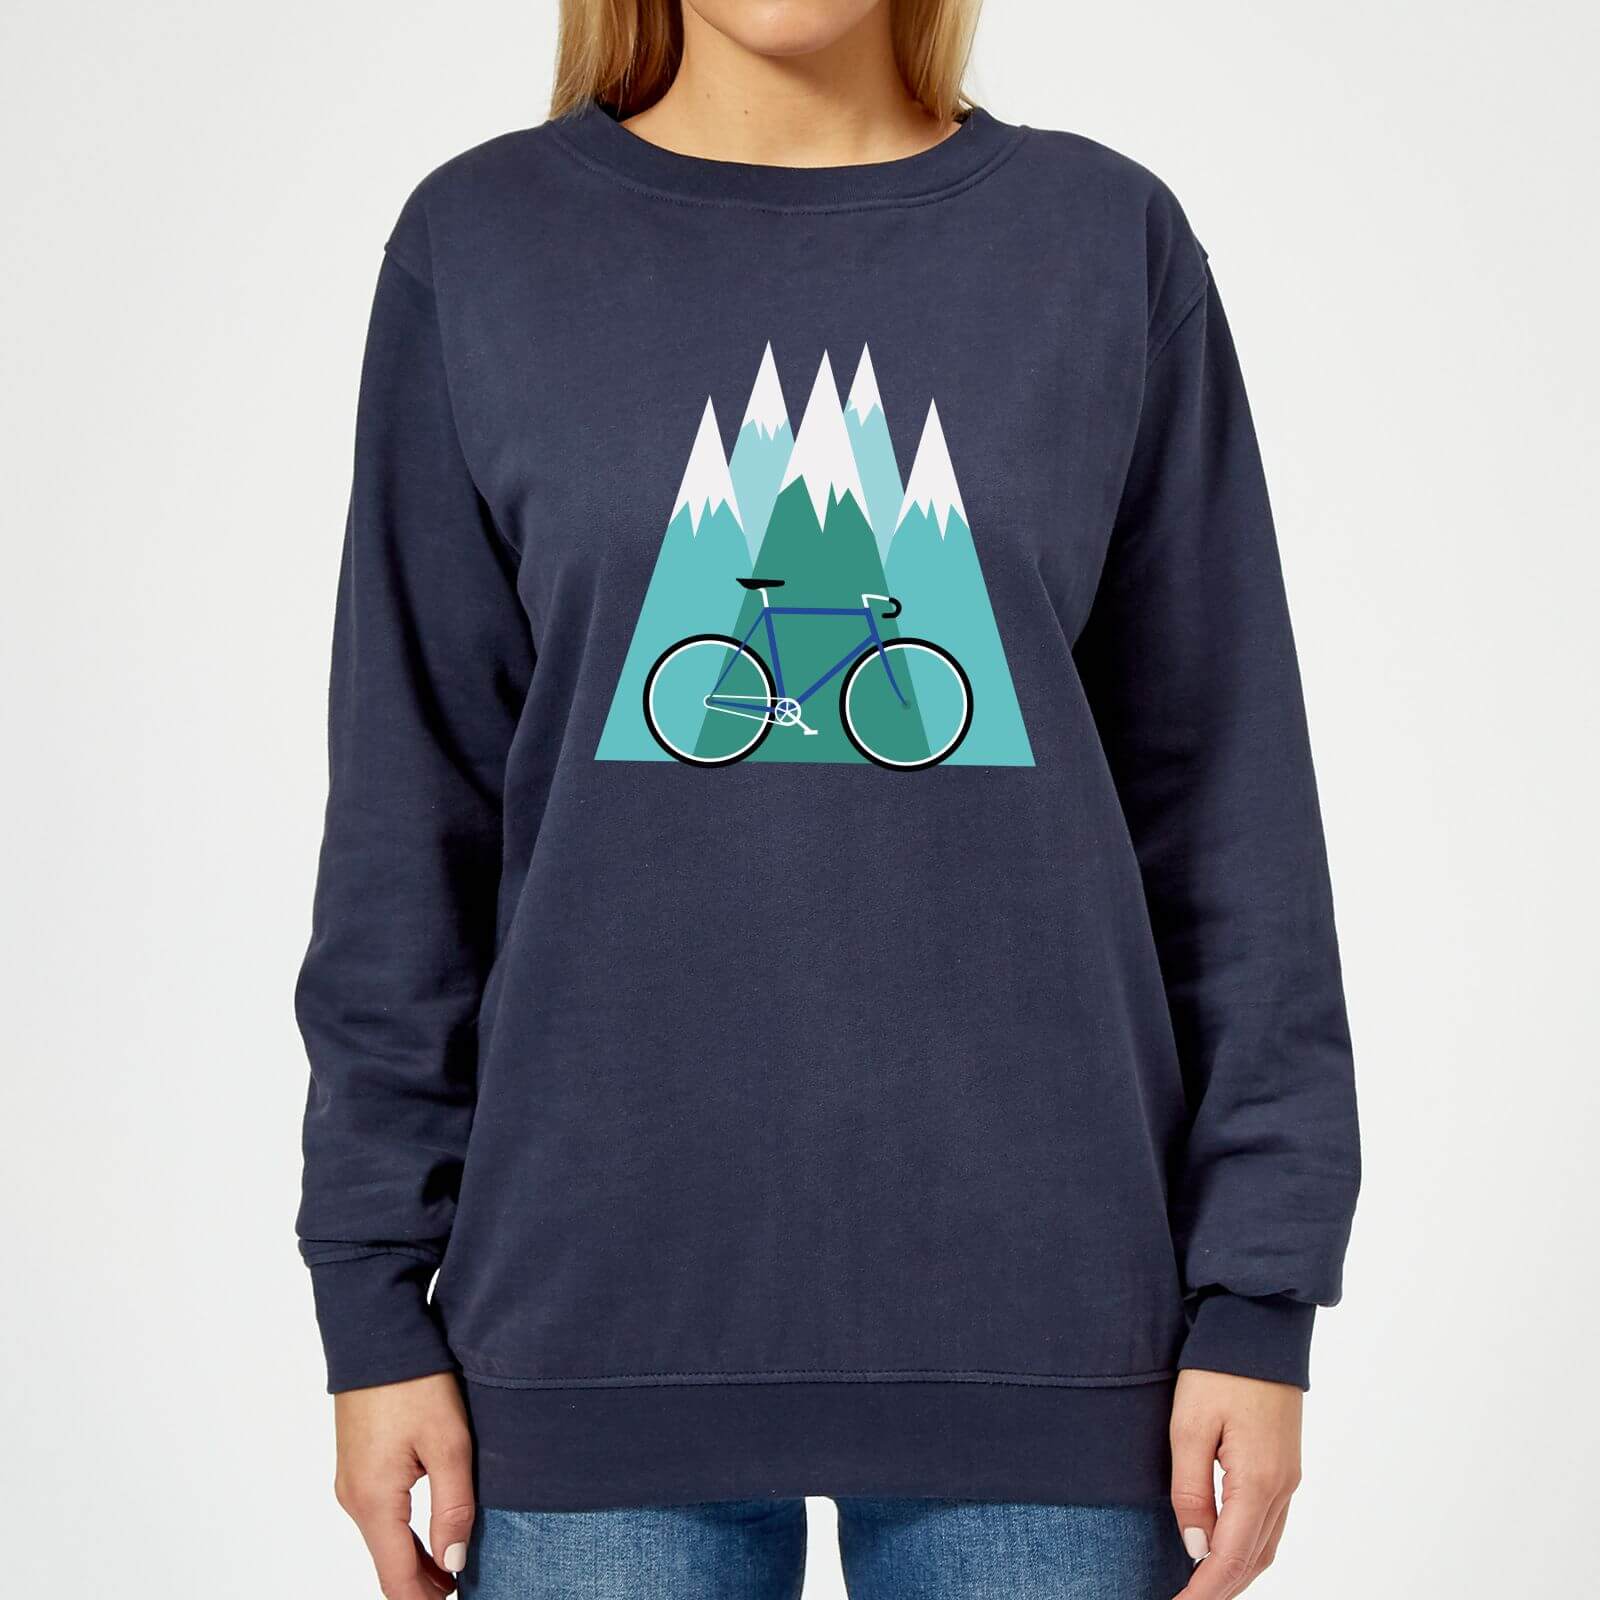 Bike and Mountains Women's Christmas Jumper - Navy - XS - Navy